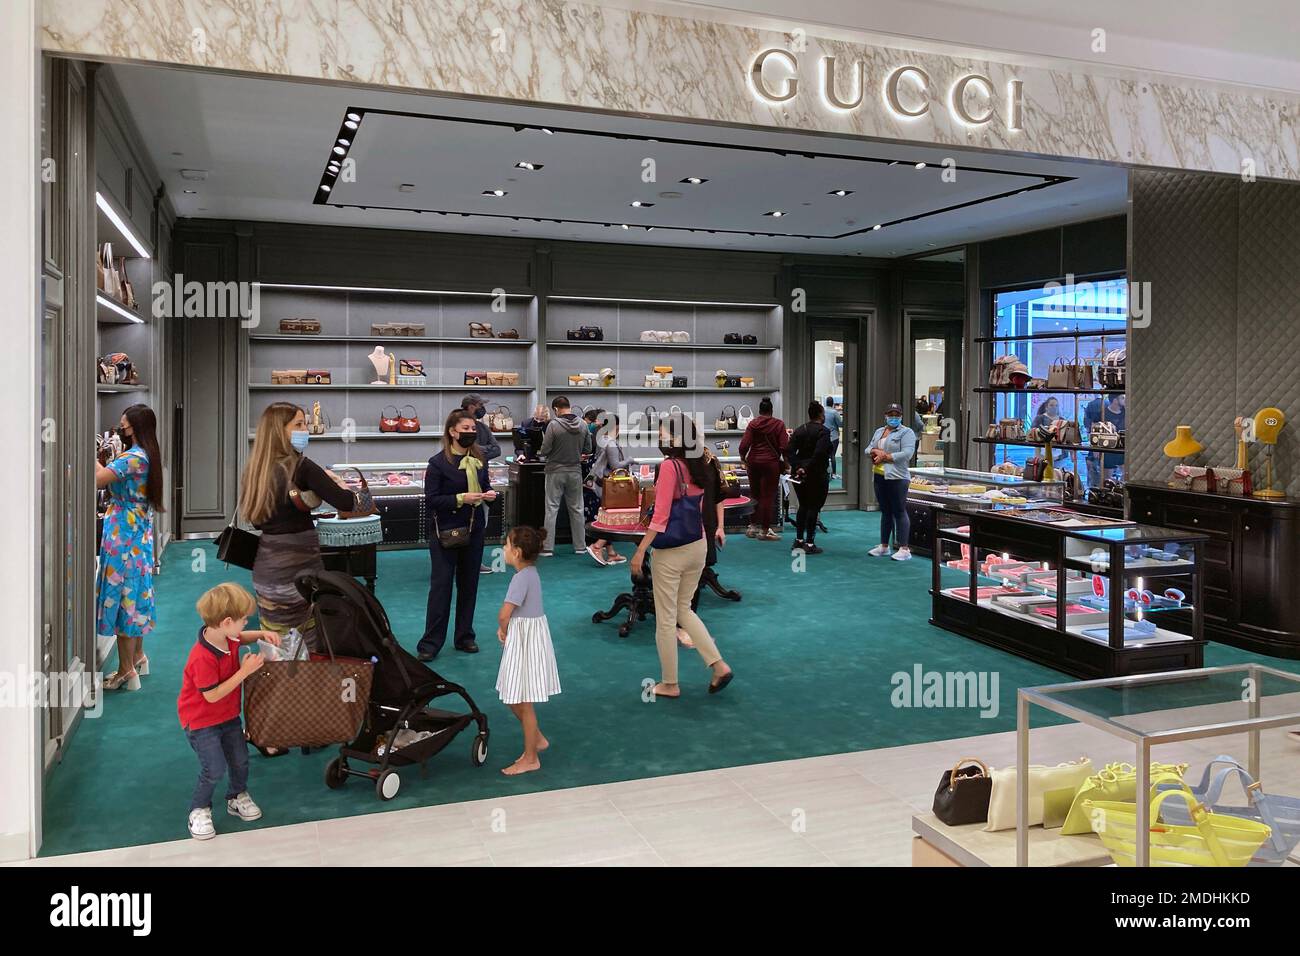 People shop in the Gucci department at a Saks Fifth Avenue store